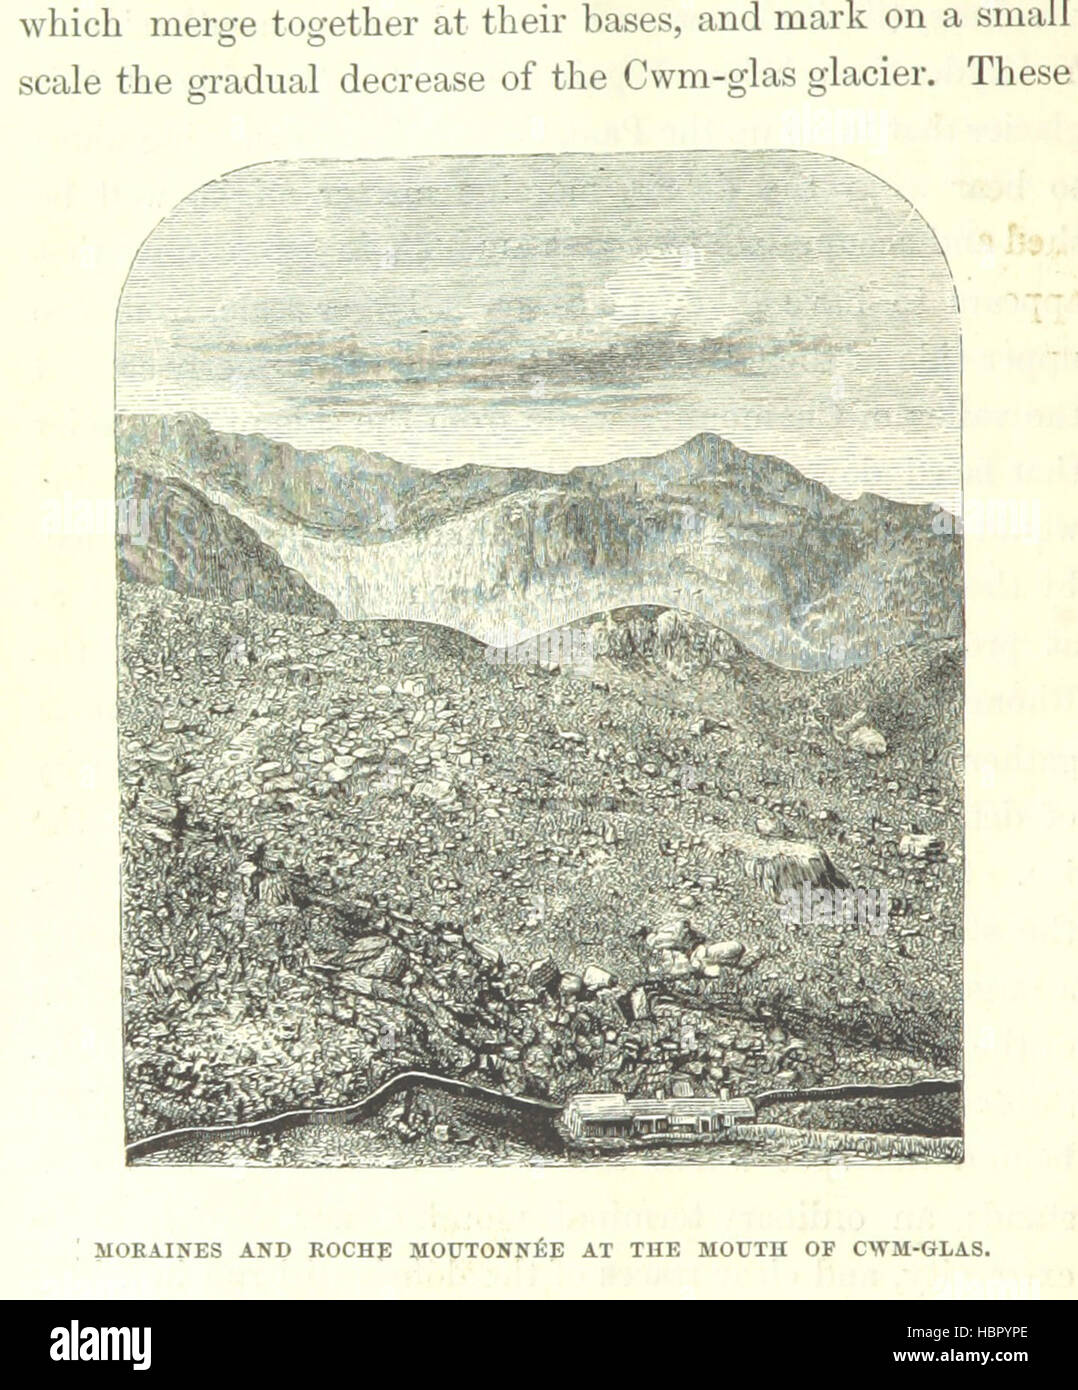 Image taken from page 500 of '[Peaks, Passes, and Glaciers. A series of excursions by members of the Alpine Club. Edited by J. Ball. [With plates and plans.]]' Image taken from page 500 of '[Peaks, Passes, and Glaciers Stock Photo